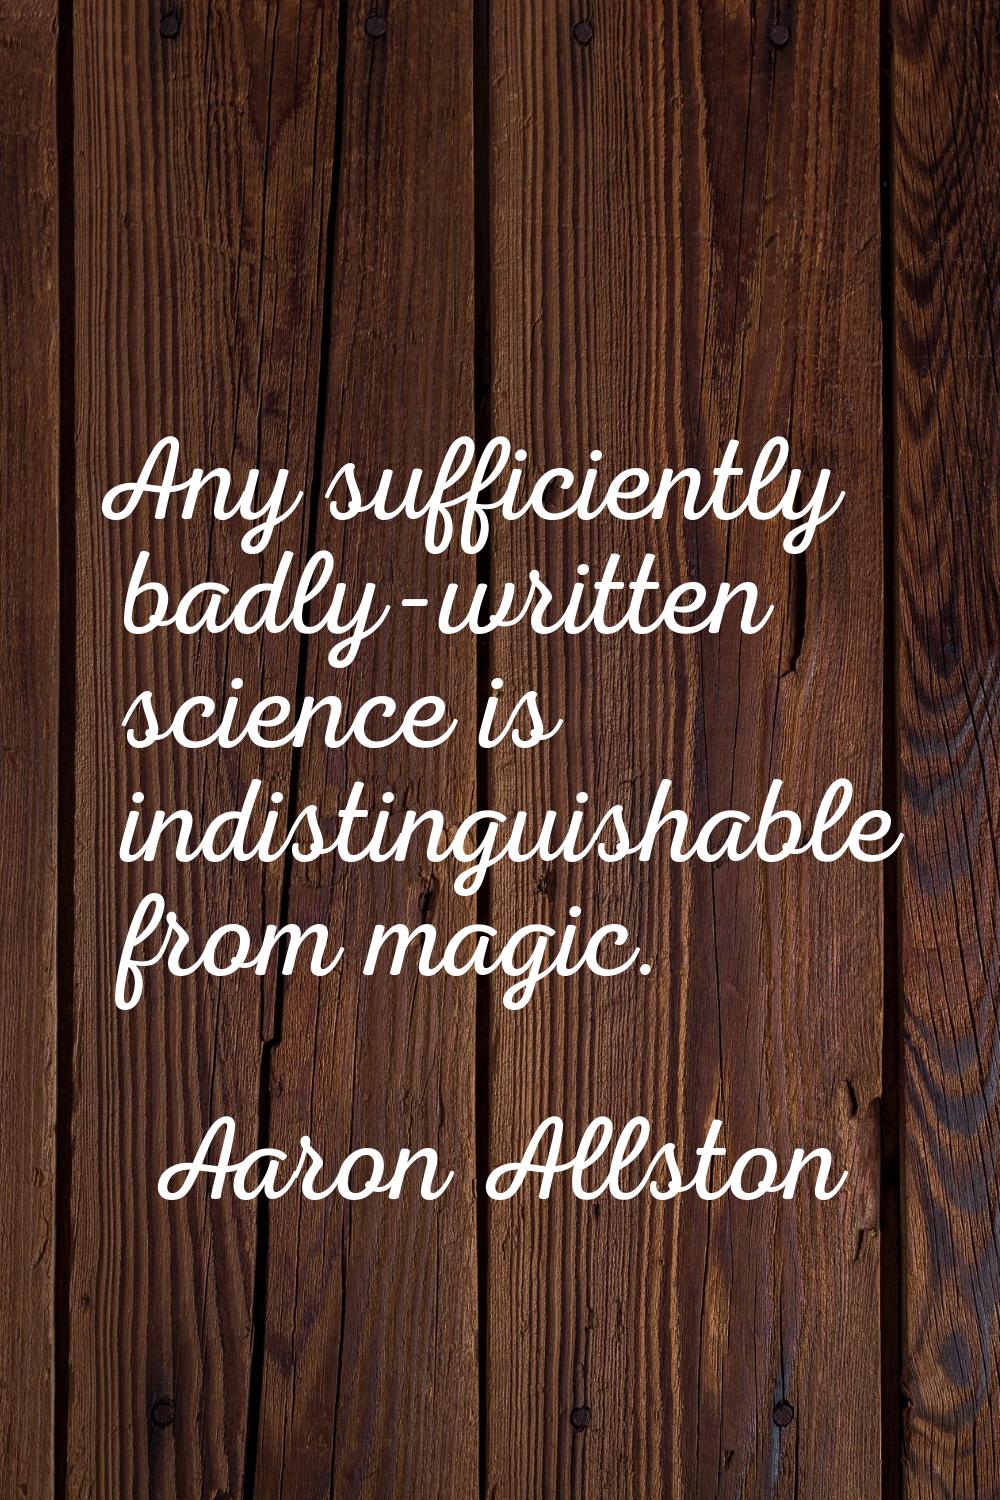 Any sufficiently badly-written science is indistinguishable from magic.